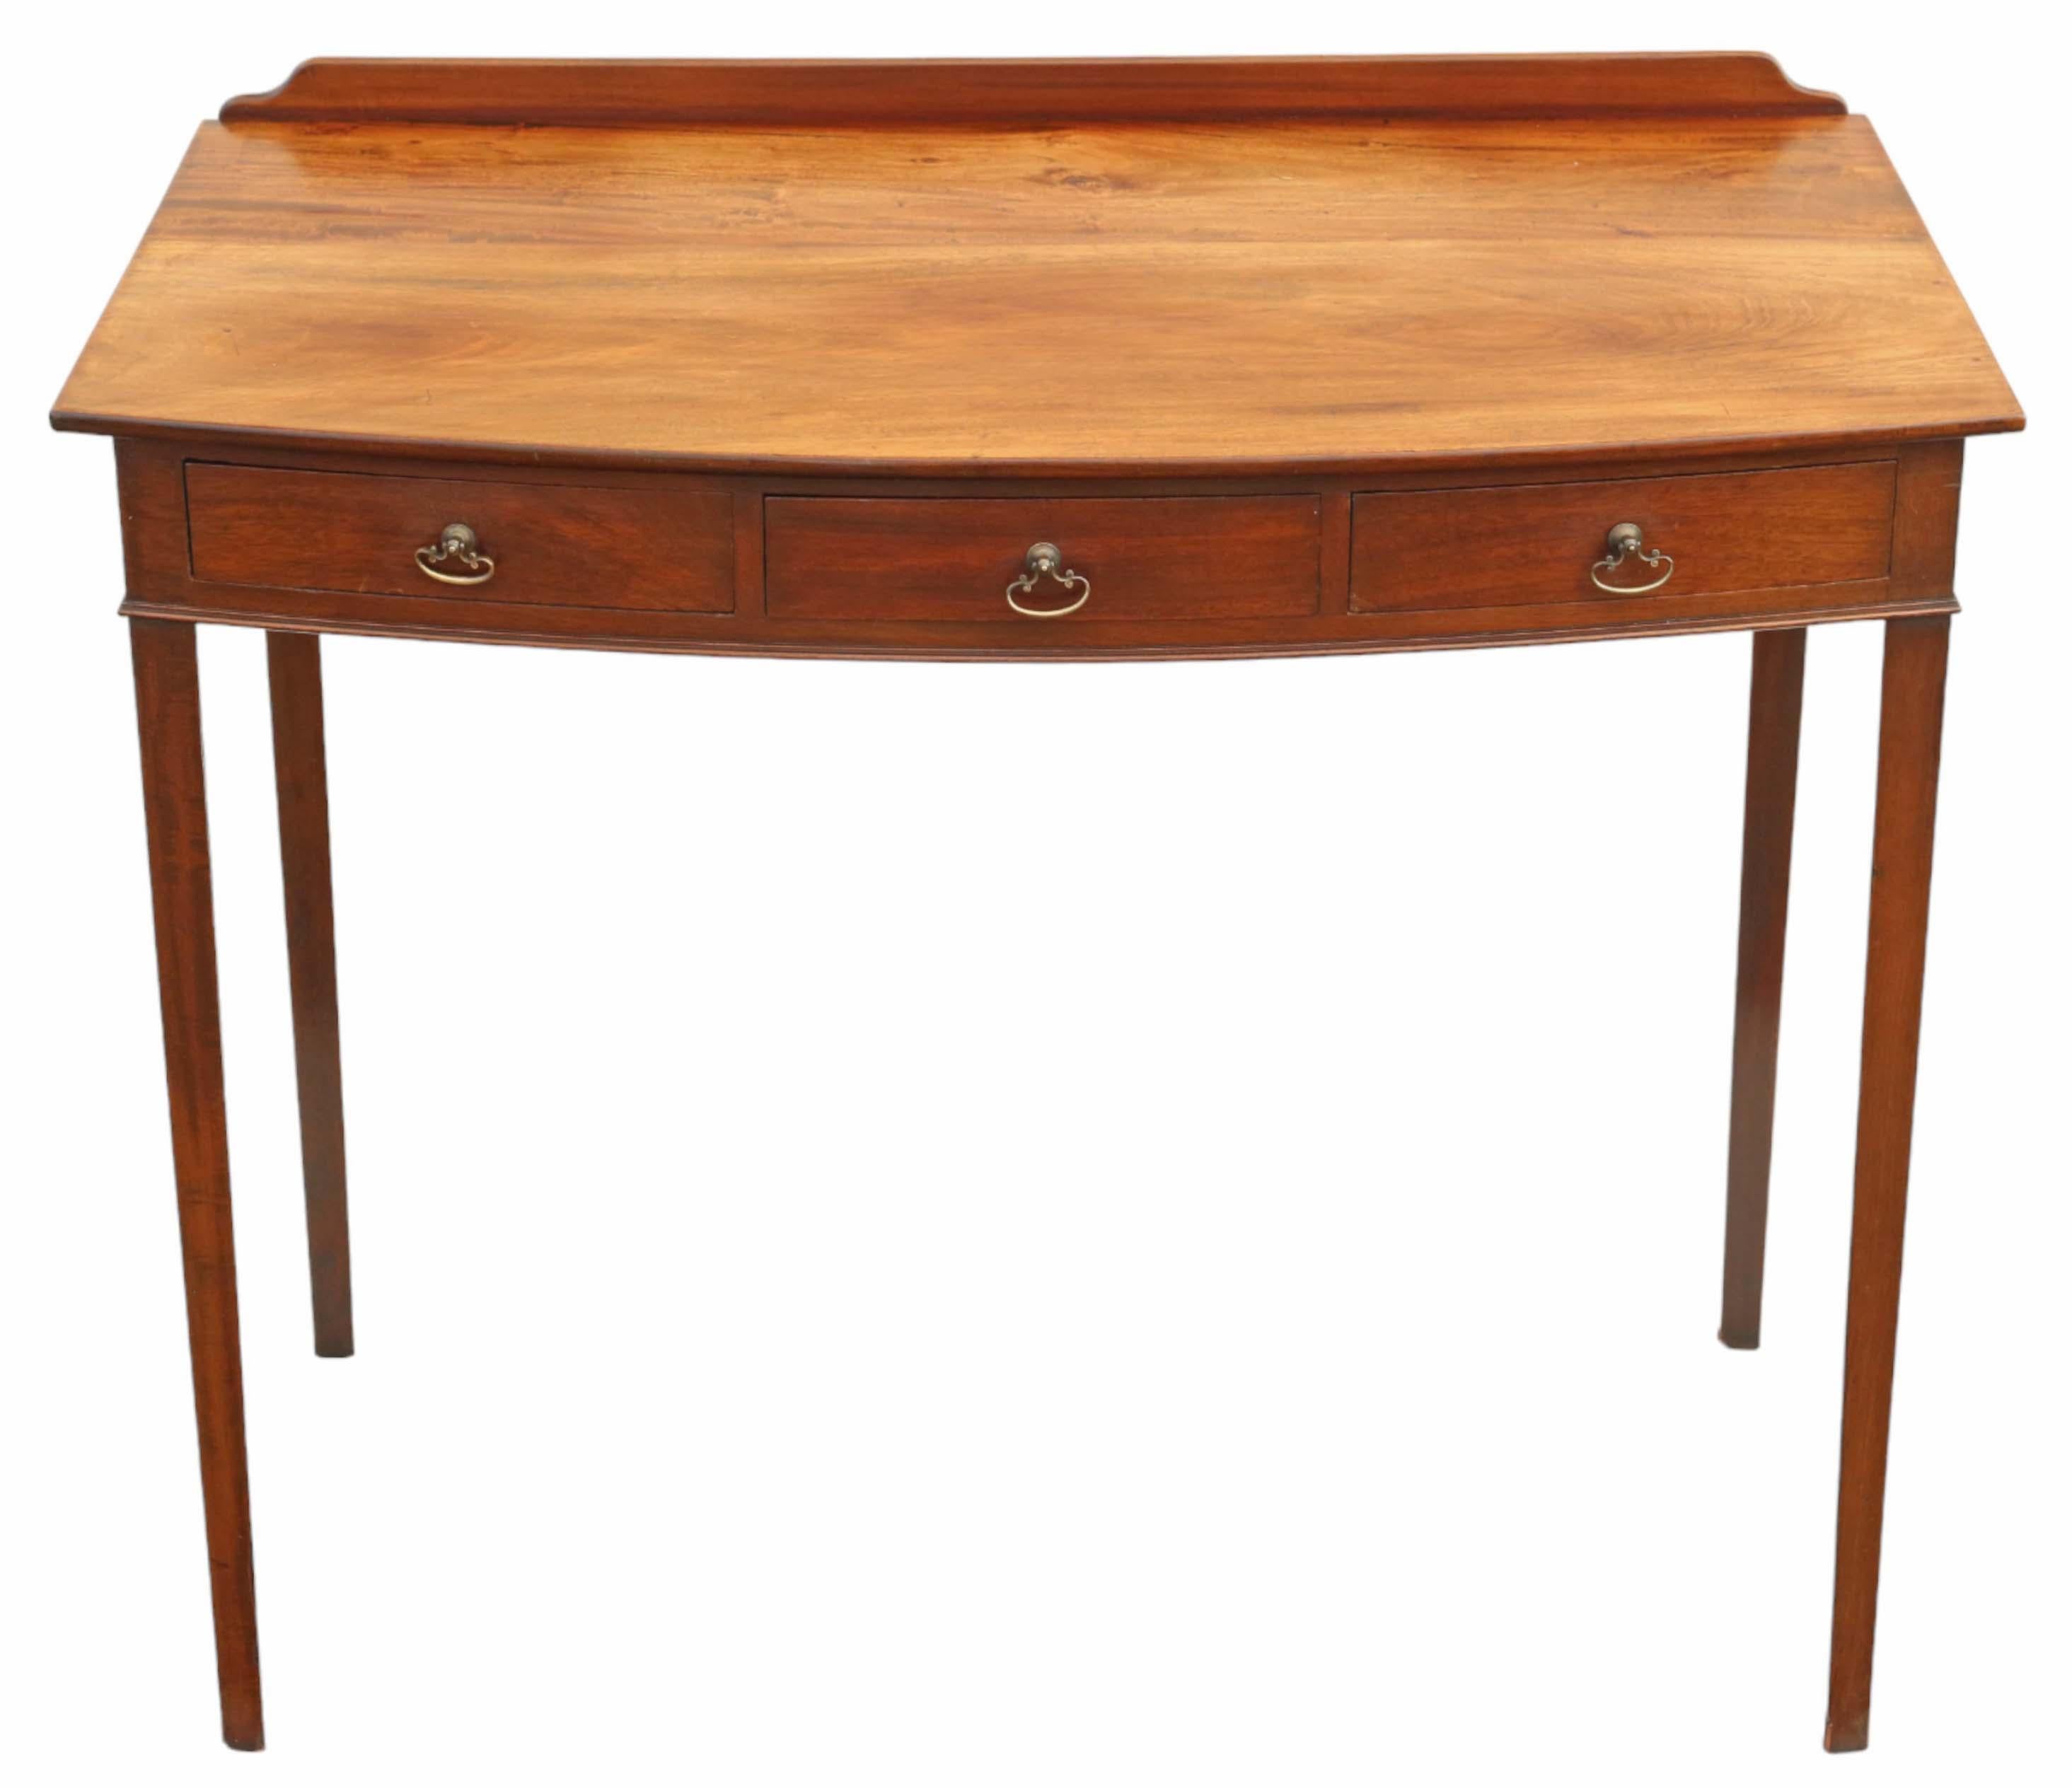 Antique, fine-quality 19th Century bow-front mahogany writing dressing table desk. Exhibiting a lovely age, color, and patina.

This piece is free from loose joints or woodworm, exuding age, character, and charm. The mahogany-lined drawers slide